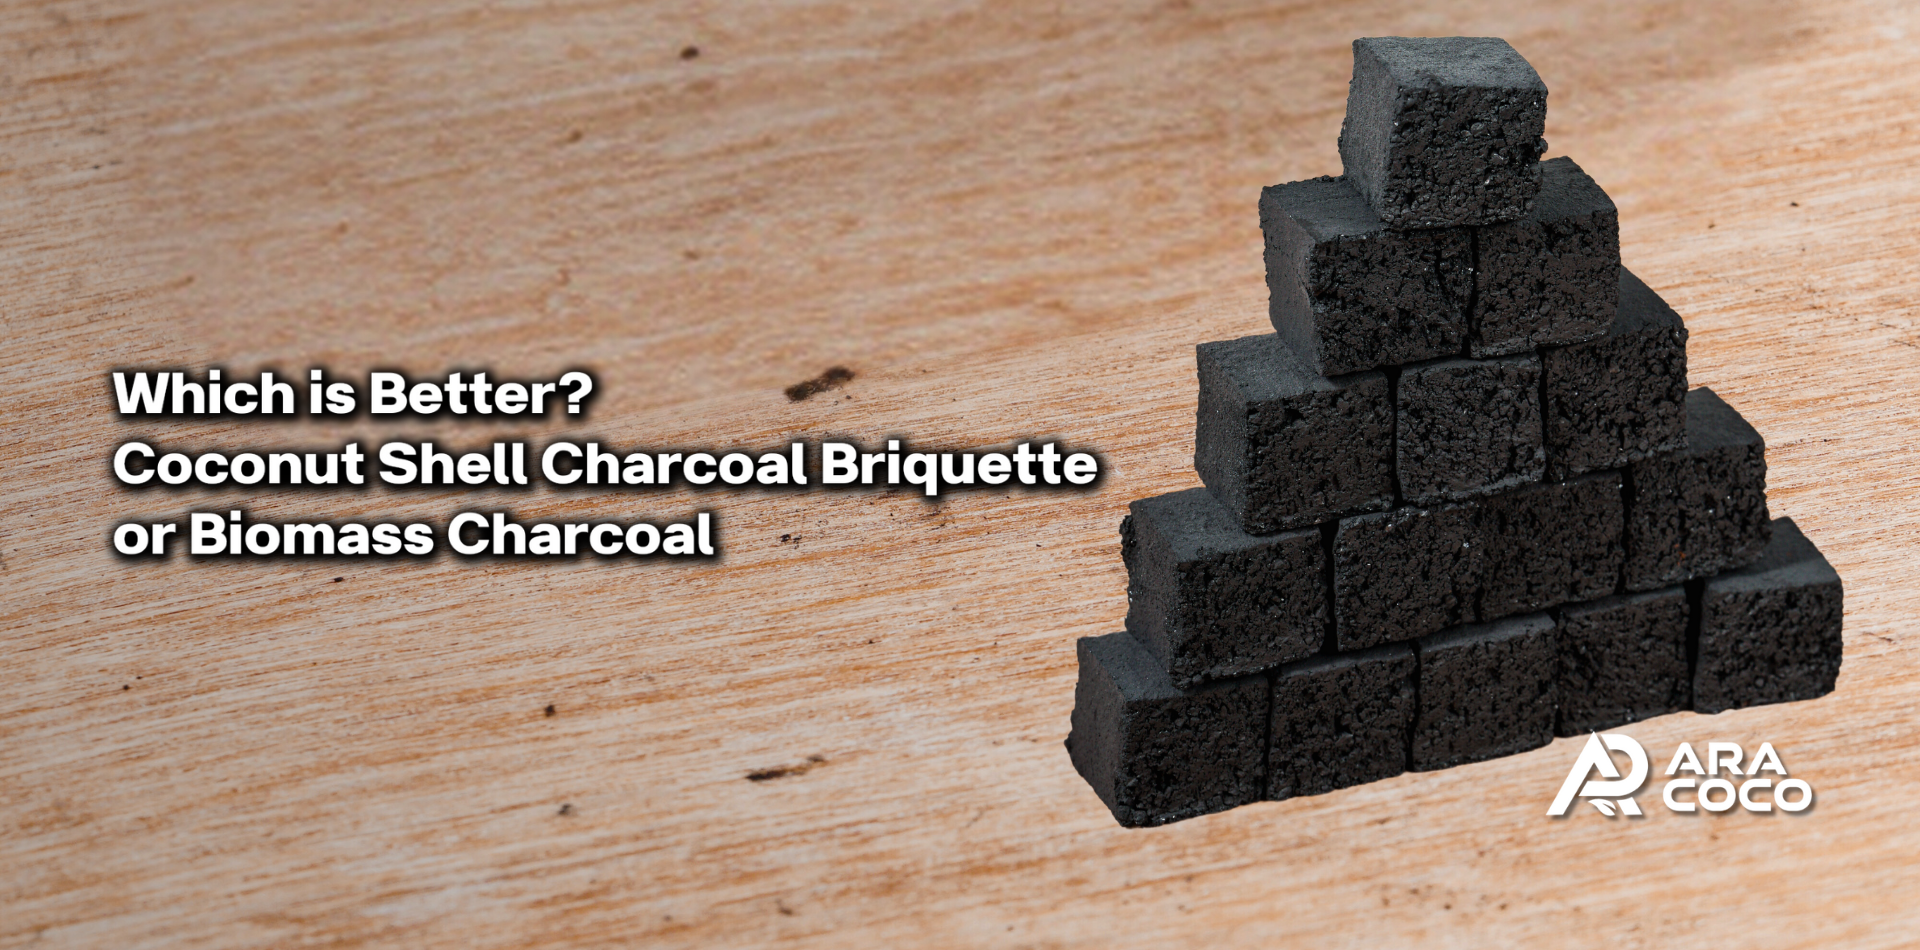 Which is Better? Coconut Shell Charcoal Briquette or Biomass Charcoal